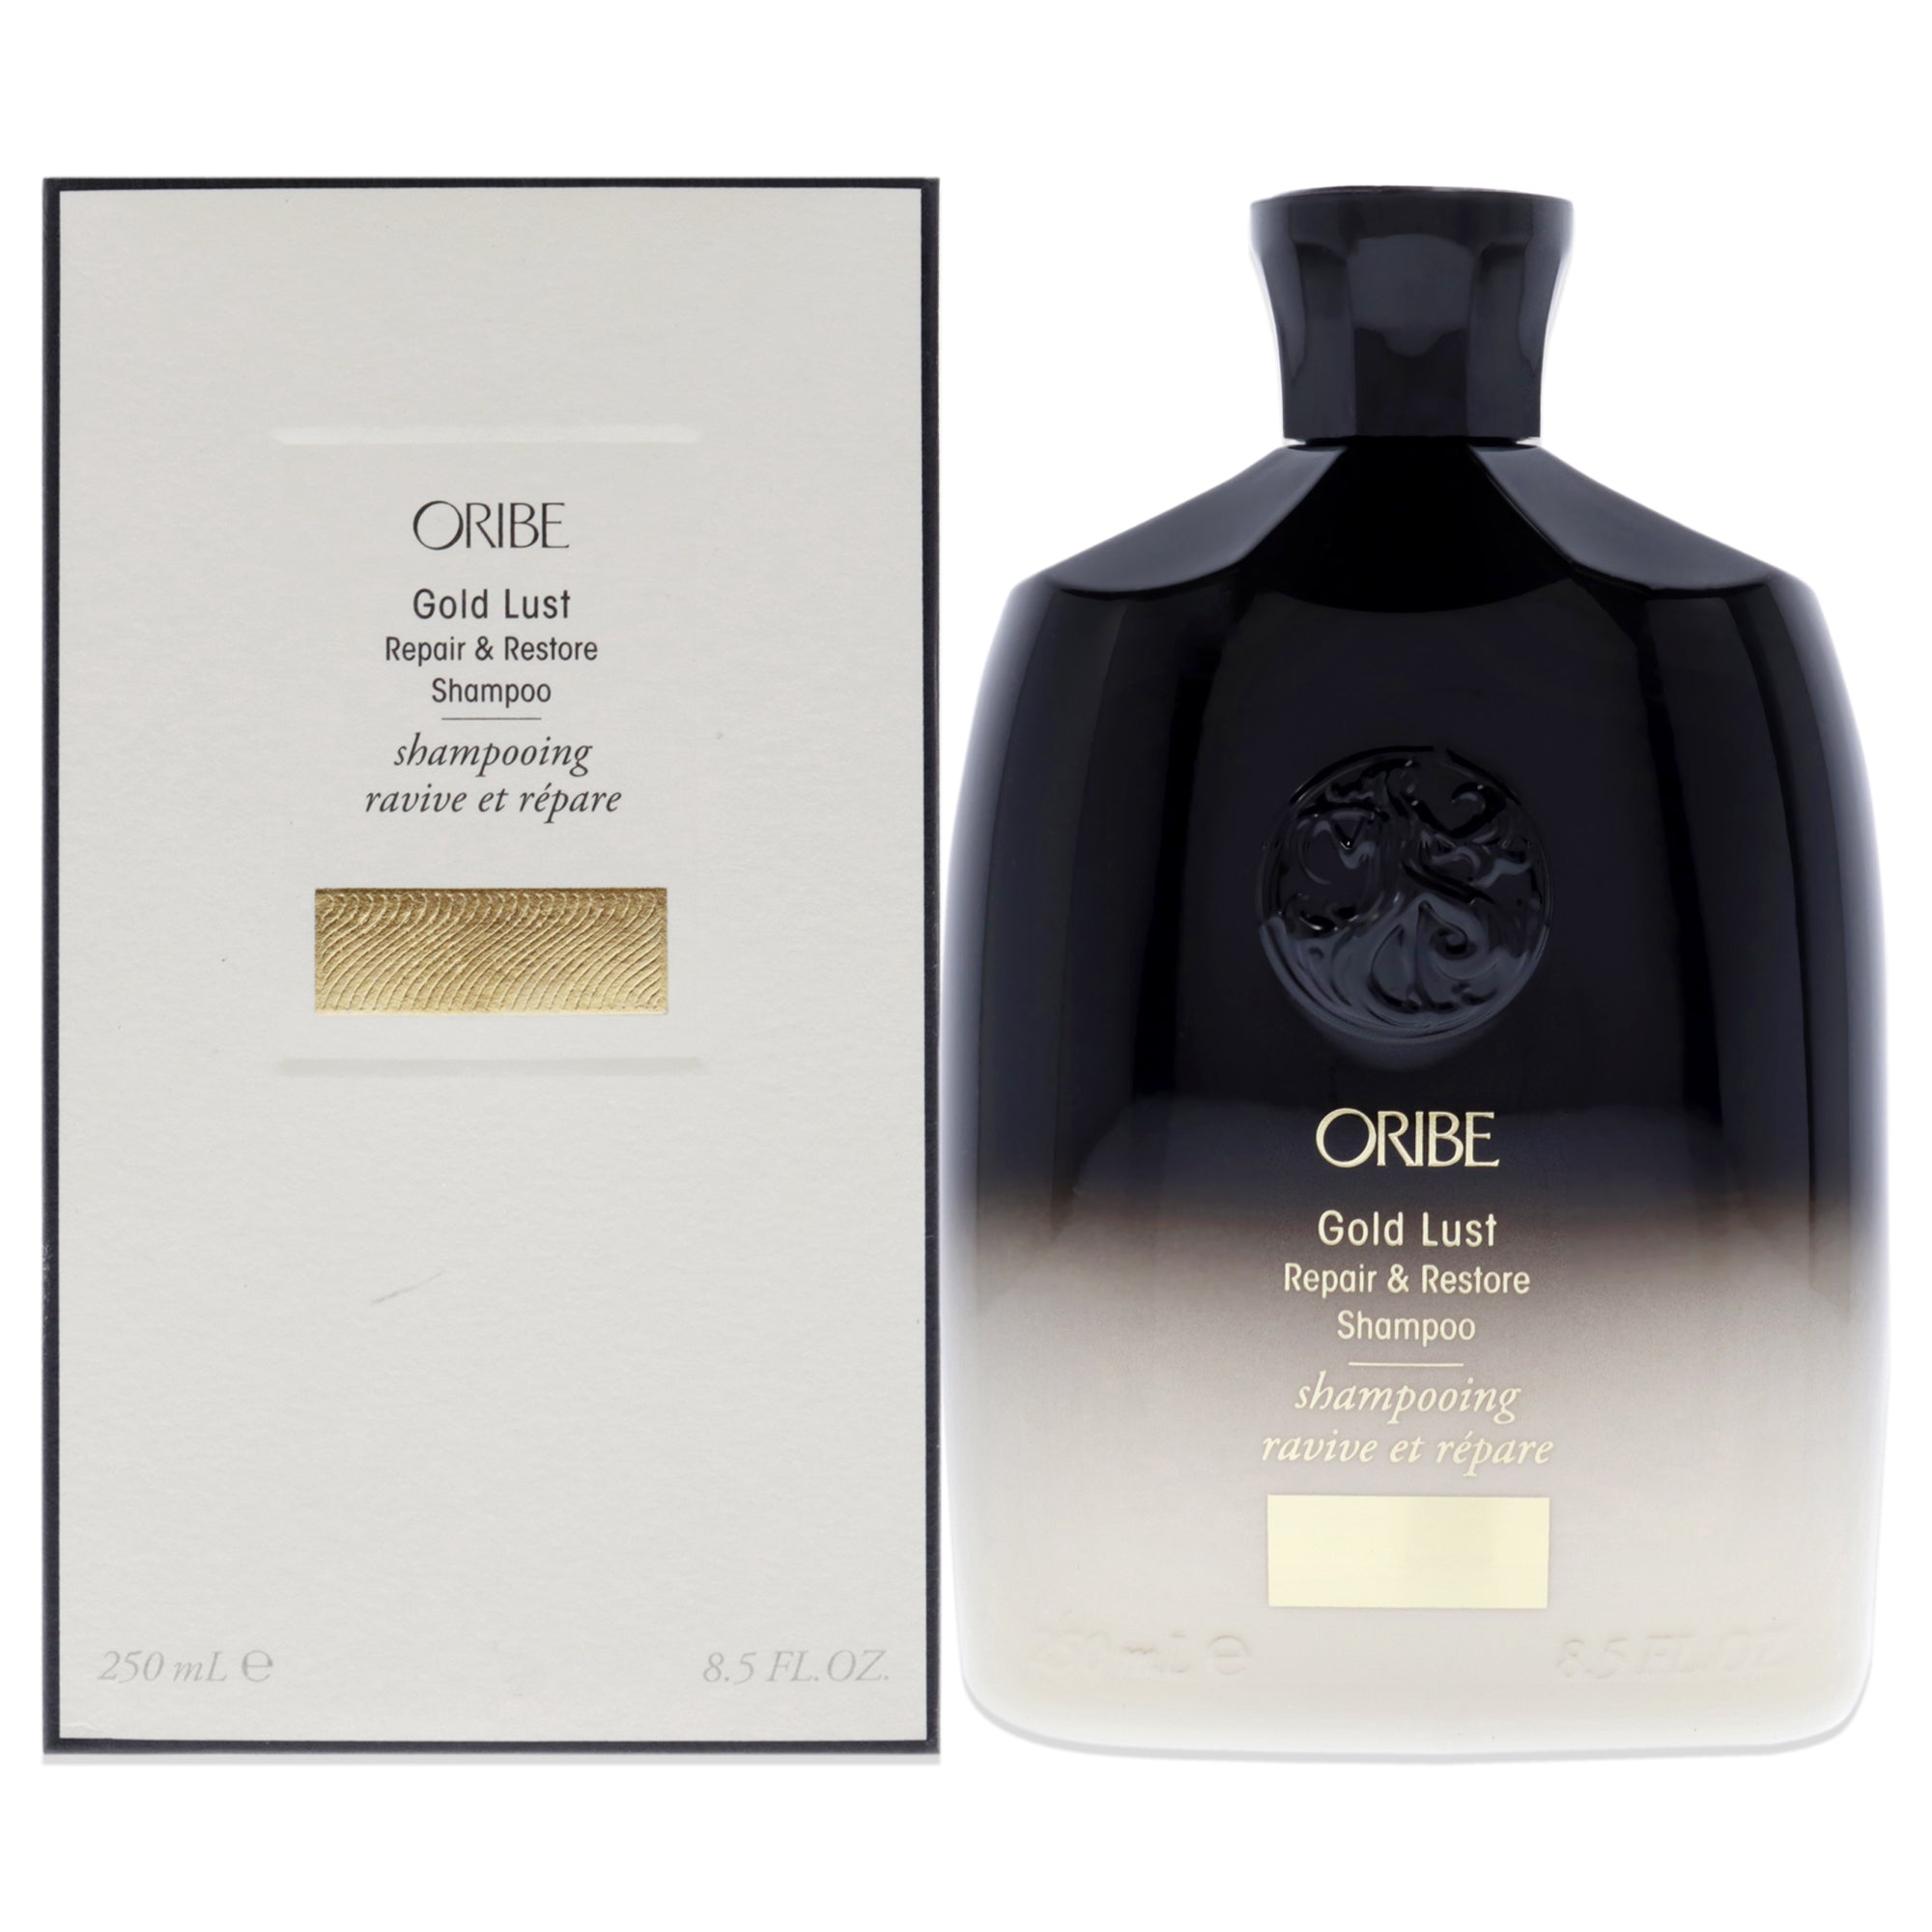 Gold Lust Repair and Restore Shampoo by Oribe for Unisex 8.5 oz Shampoo